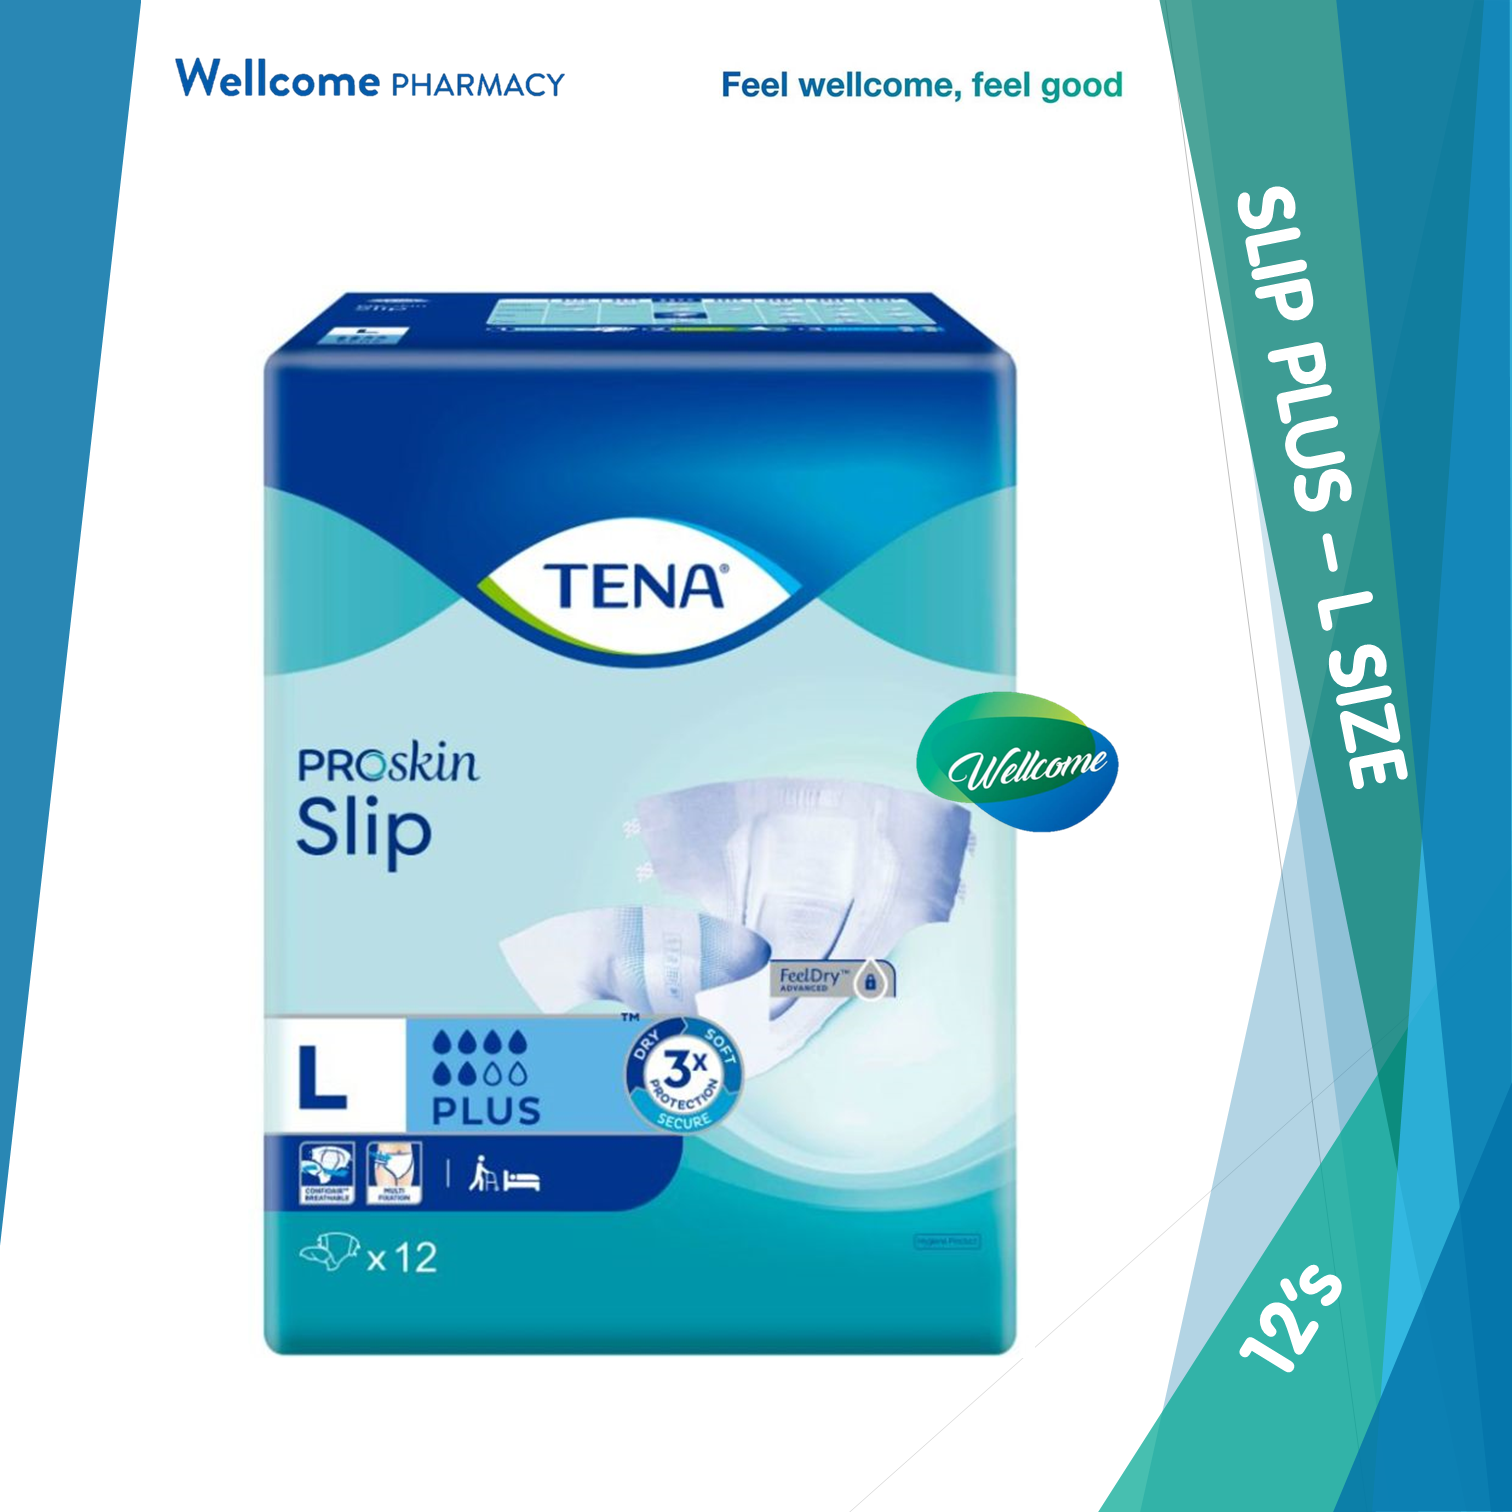 Tena ProSkin SkinComfort Formula Incontinence Diapers - Large - 12's